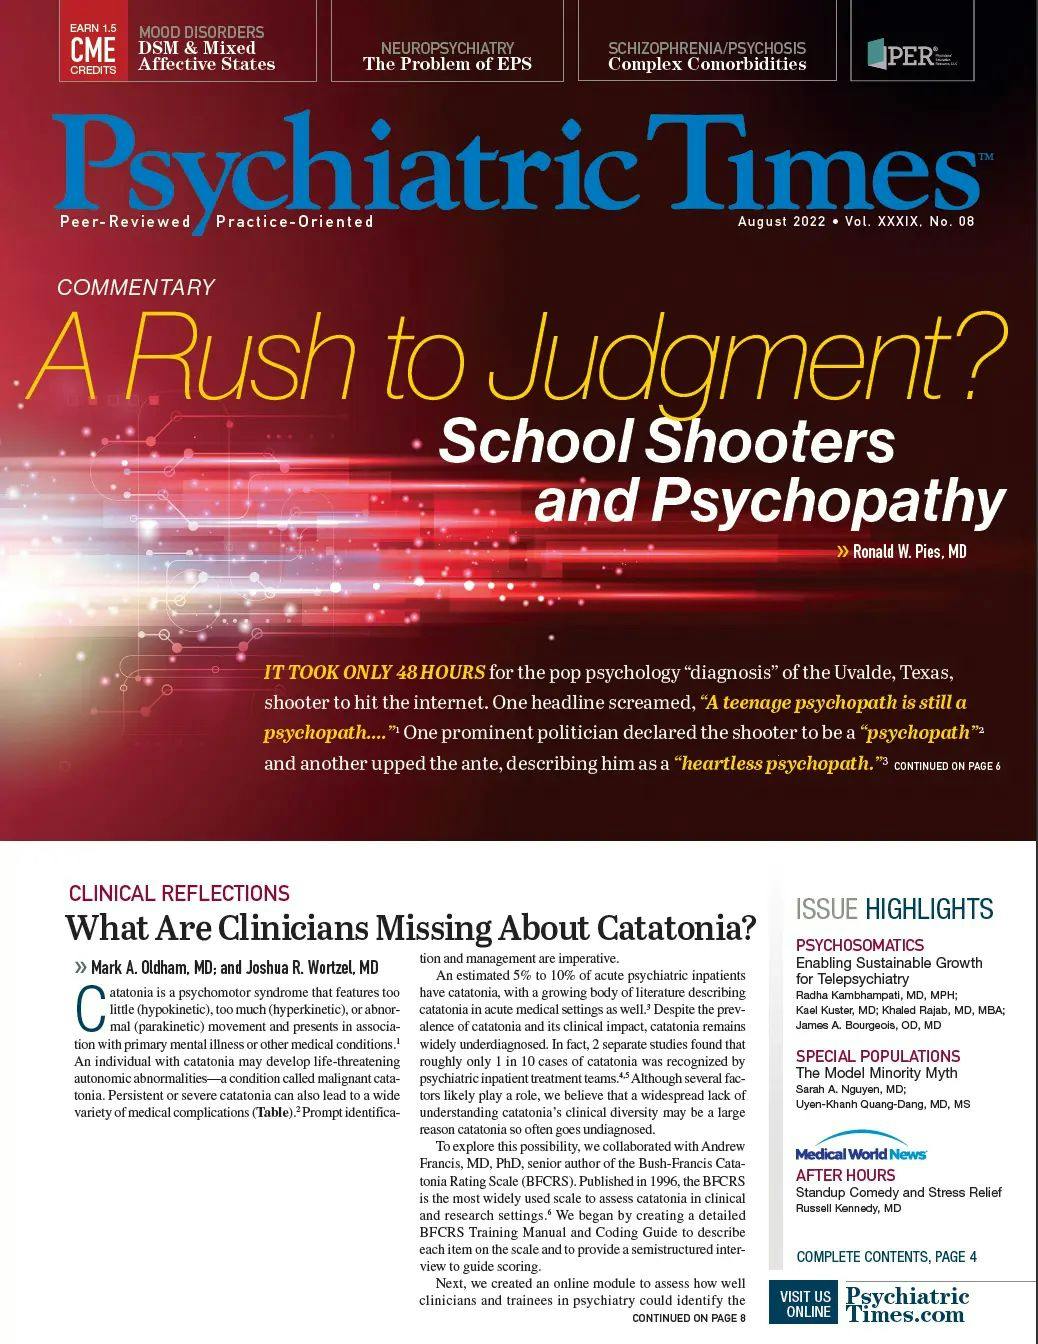 The experts weighed in on a wide variety of psychiatric issues for the August 2022 issue of Psychiatric Times.